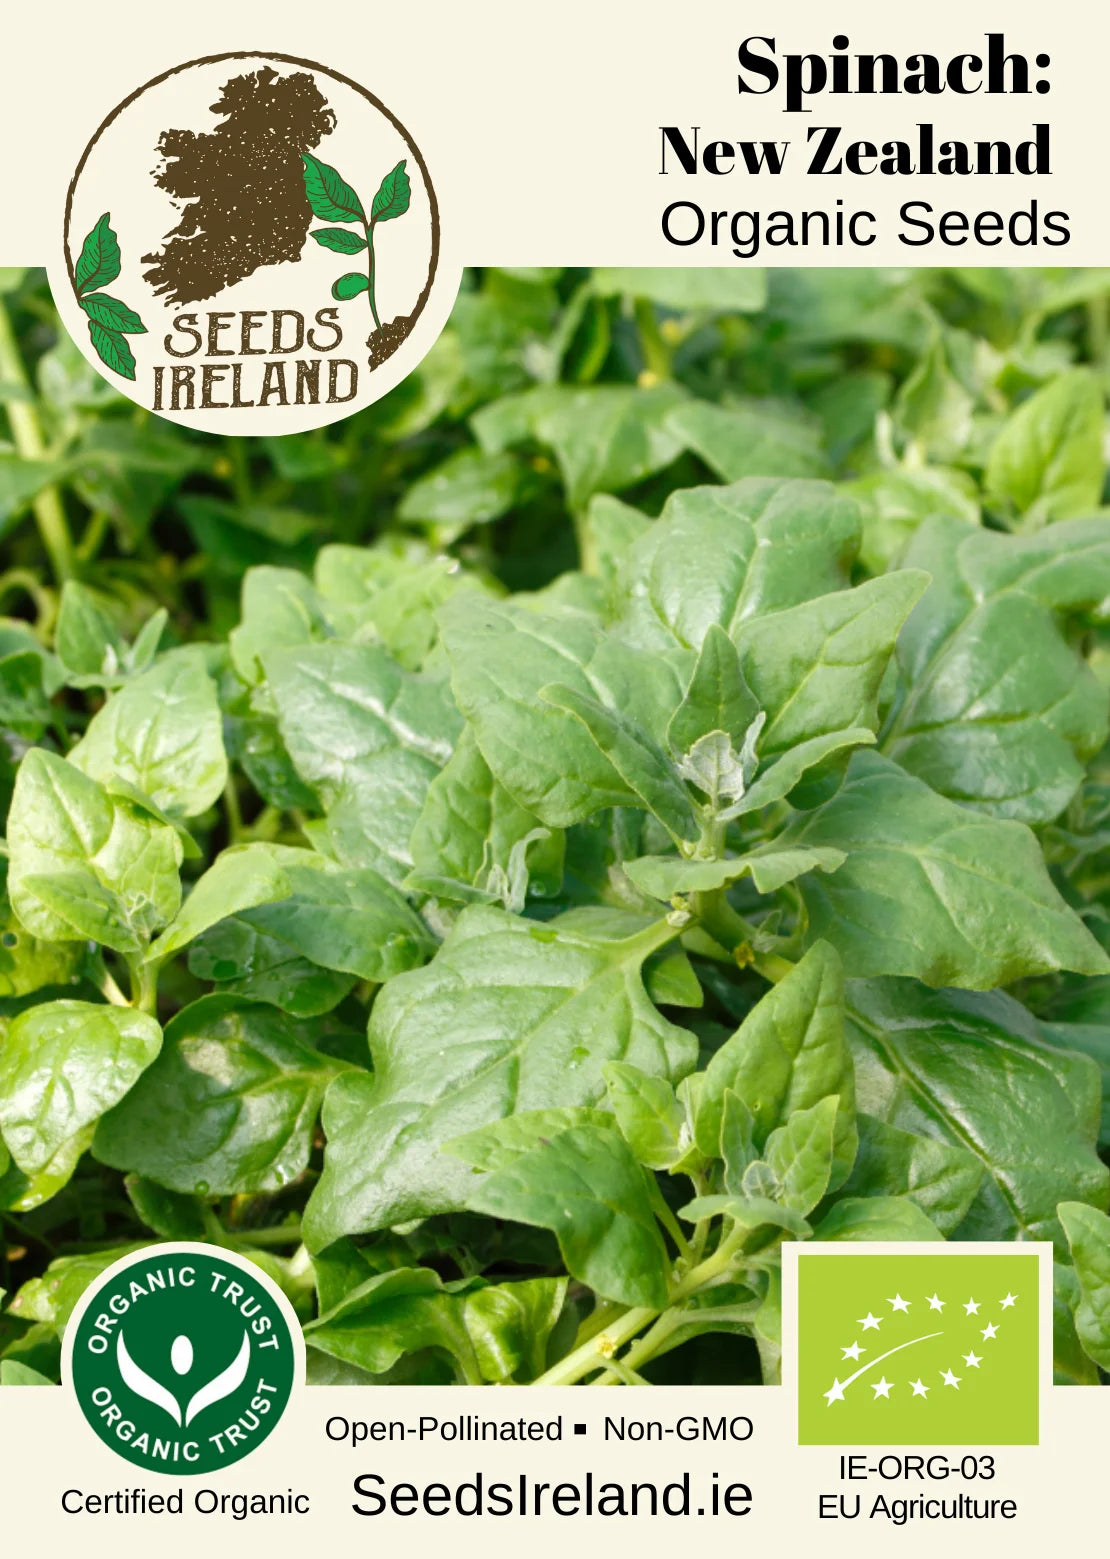 Spinach: New Zealand Organic Seed